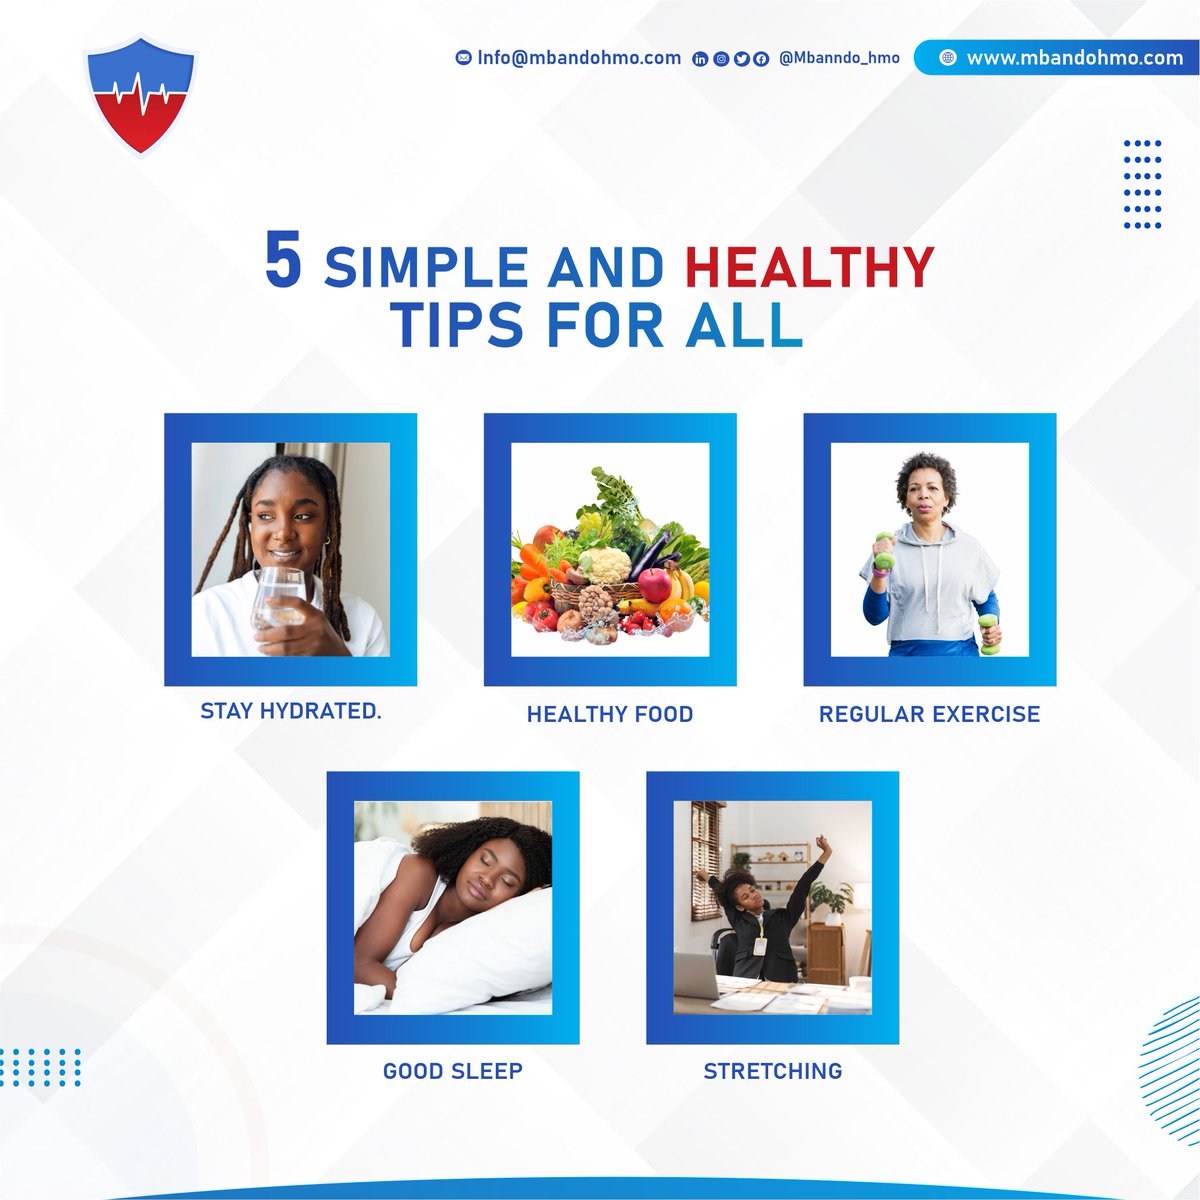 For the well-being of all, consider these five healthy recommendations. 
#healthforall #healthylifestyle #stayhydrated #goodsleep #regularexercise #healthyfood #mbandohmo #mbandocare